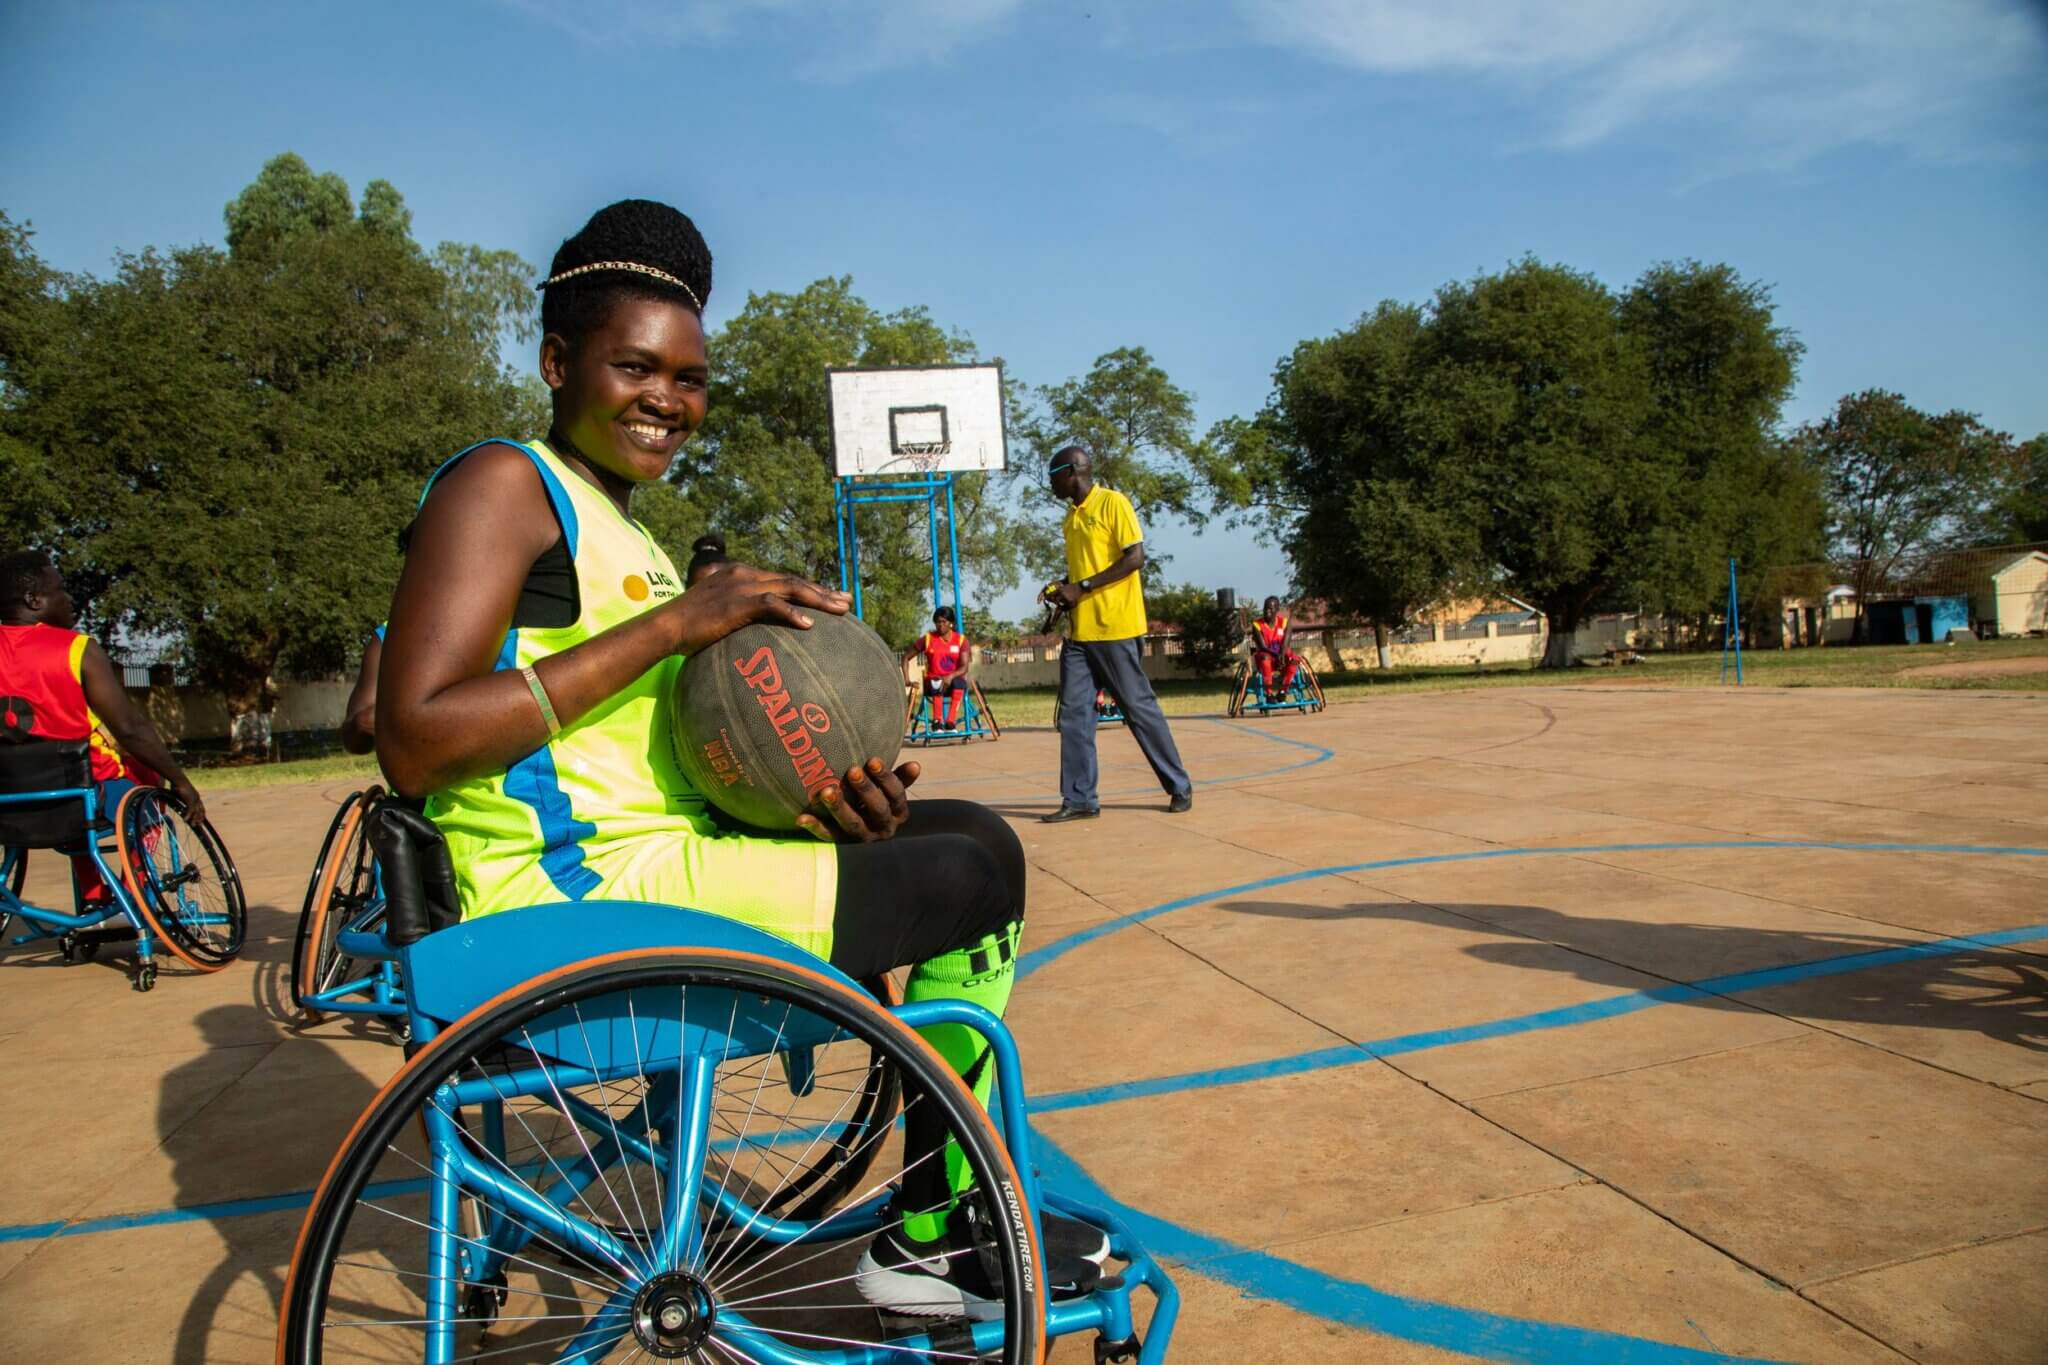 Lucy, a Light for the World Disability Inclusion Facilitator with a physical disability, is sitting in a wheelchair and taking part in a basketball tournament. She wears a yellow jersey and holds a ball in her hands with a smile.